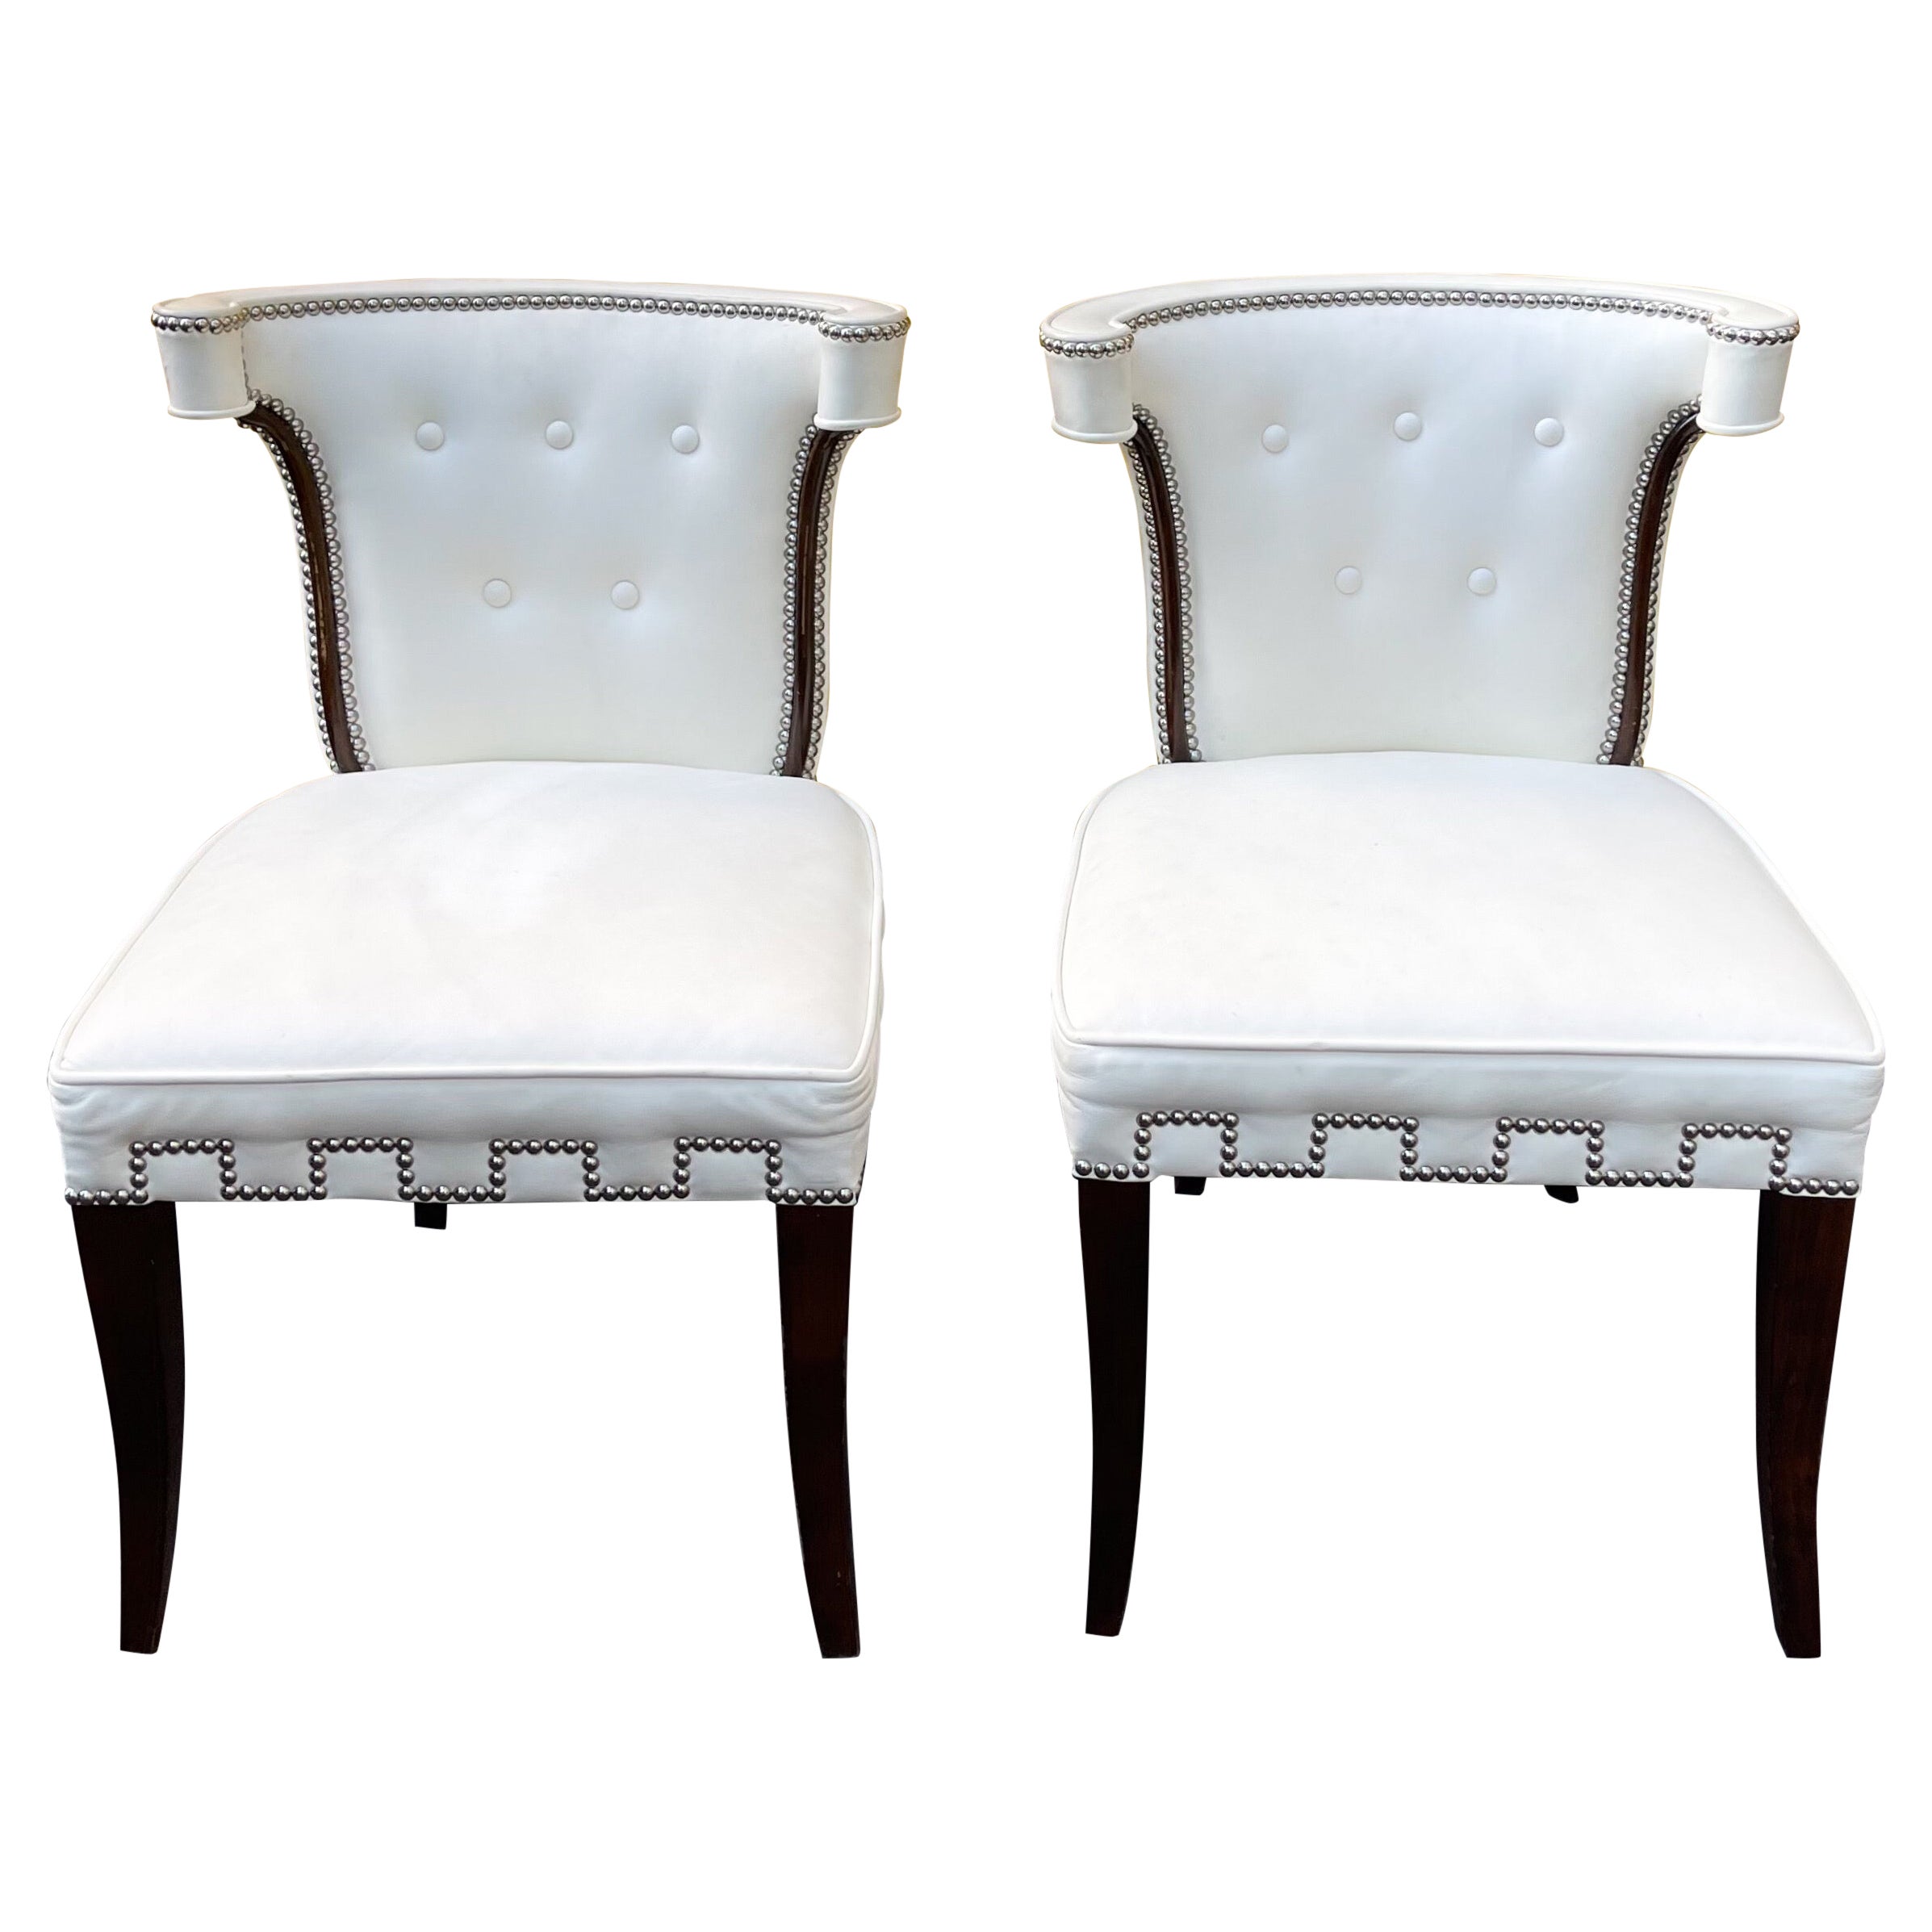 Late 20th-C. Regency Style White Leather Chairs Att. To Billy Baldwin -Pair